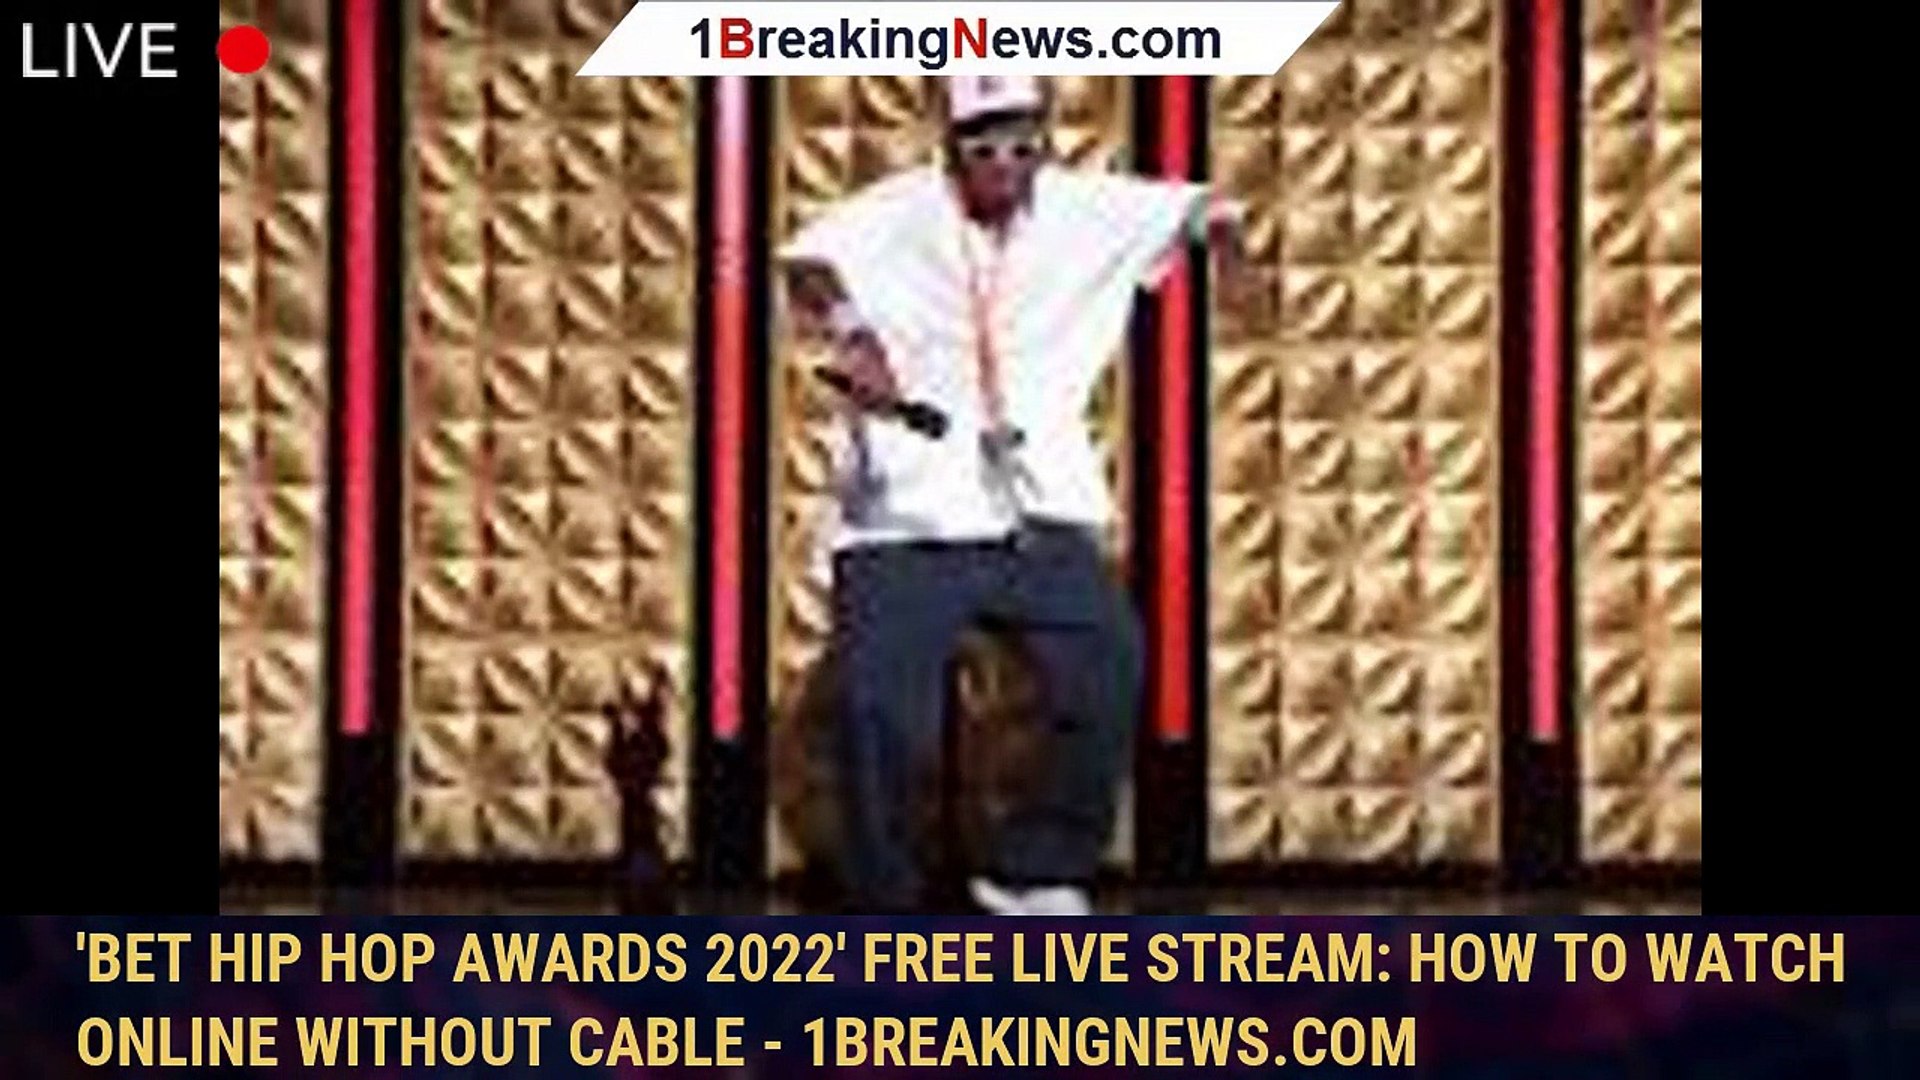 BET Hip Hop Awards 2022′ free live stream How to watch online without cable - 1breakingnews